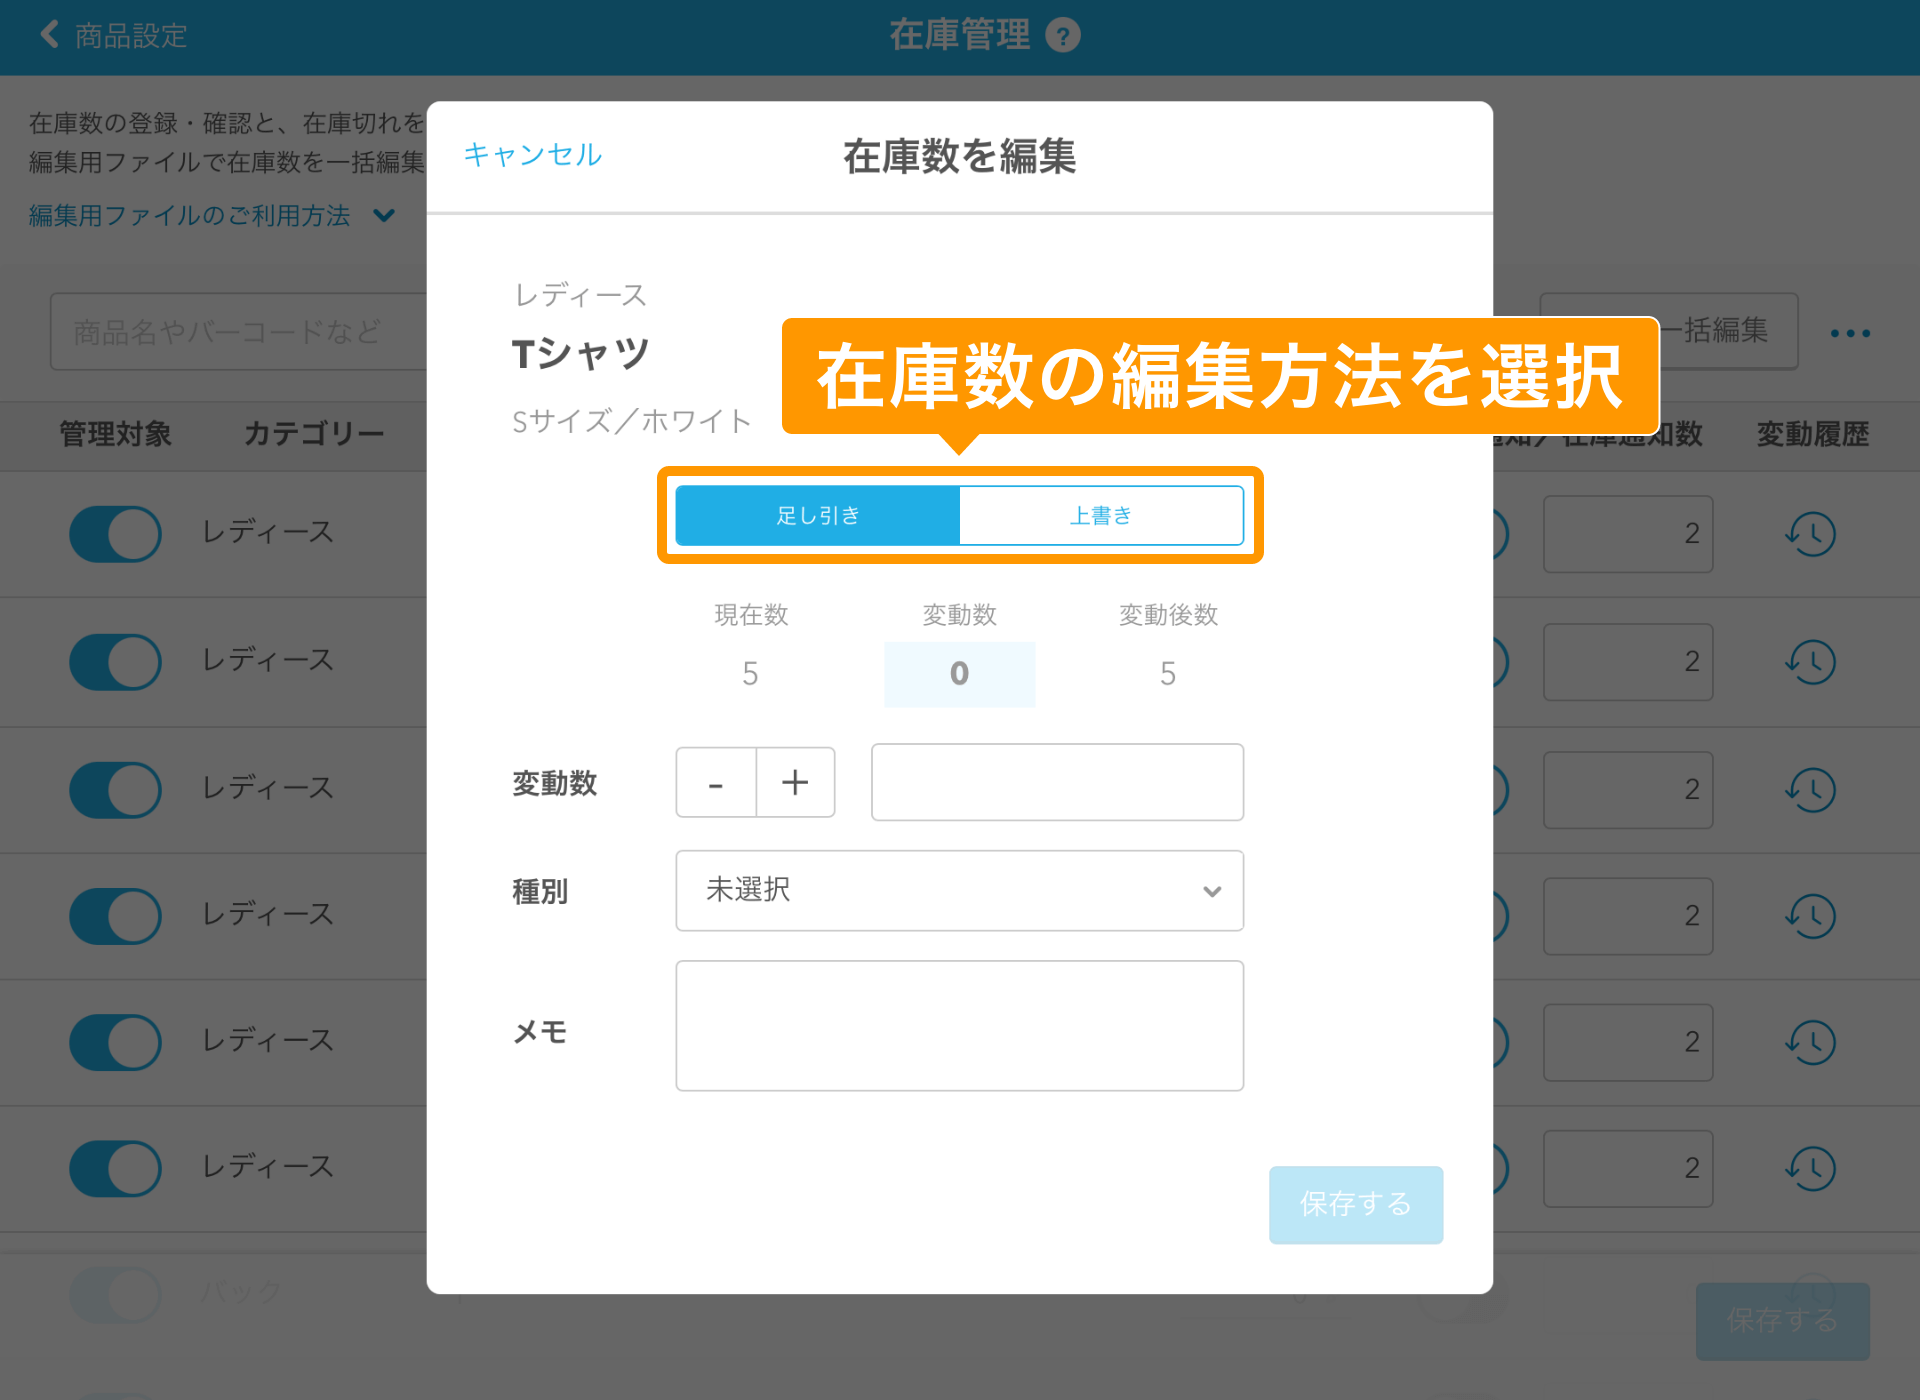 Airレジ 在庫管理画面 在庫数を編集